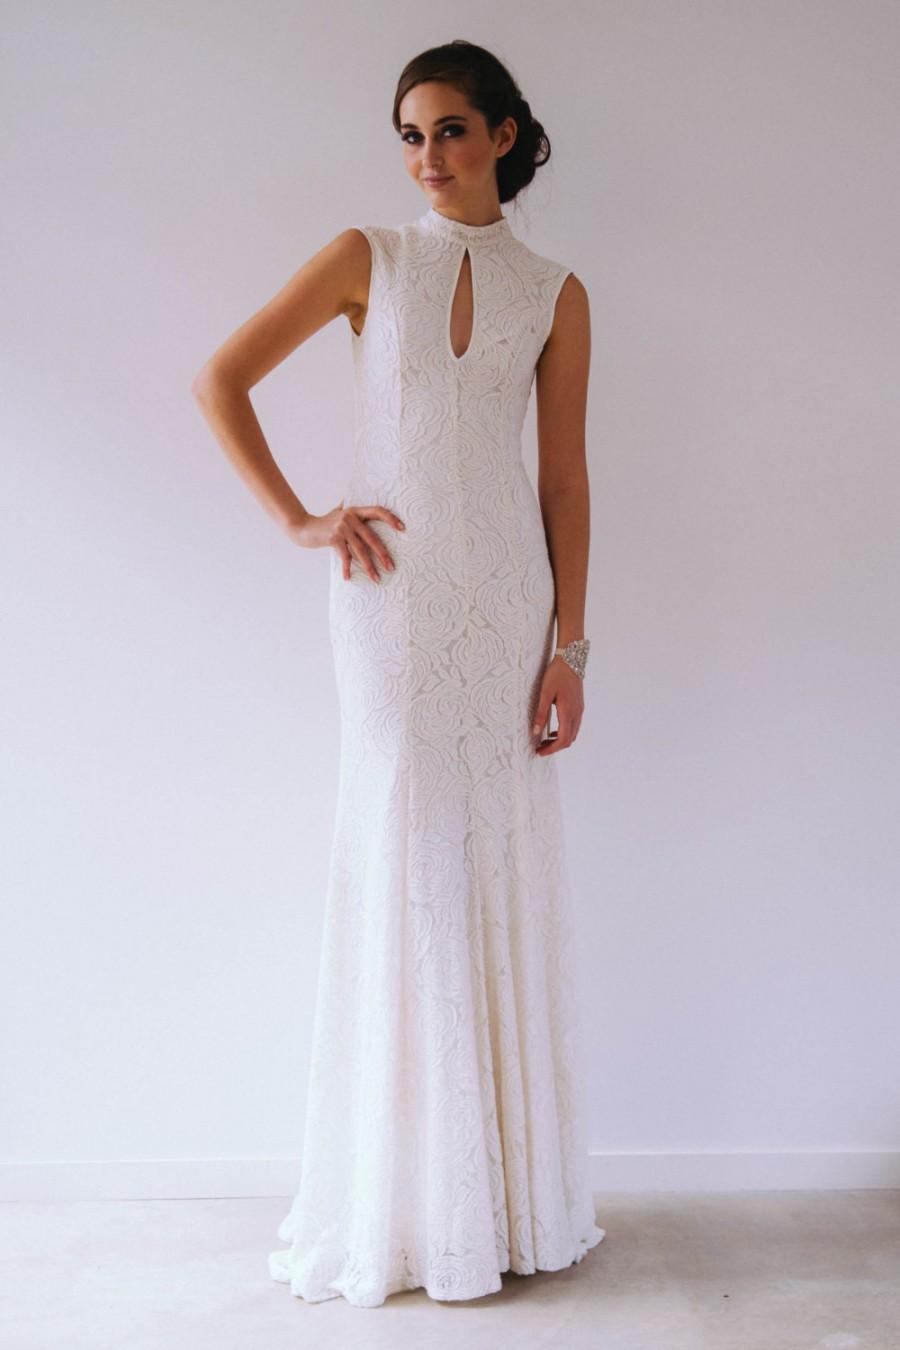 Mariage - High neck lace gown - SAMPLE SALE